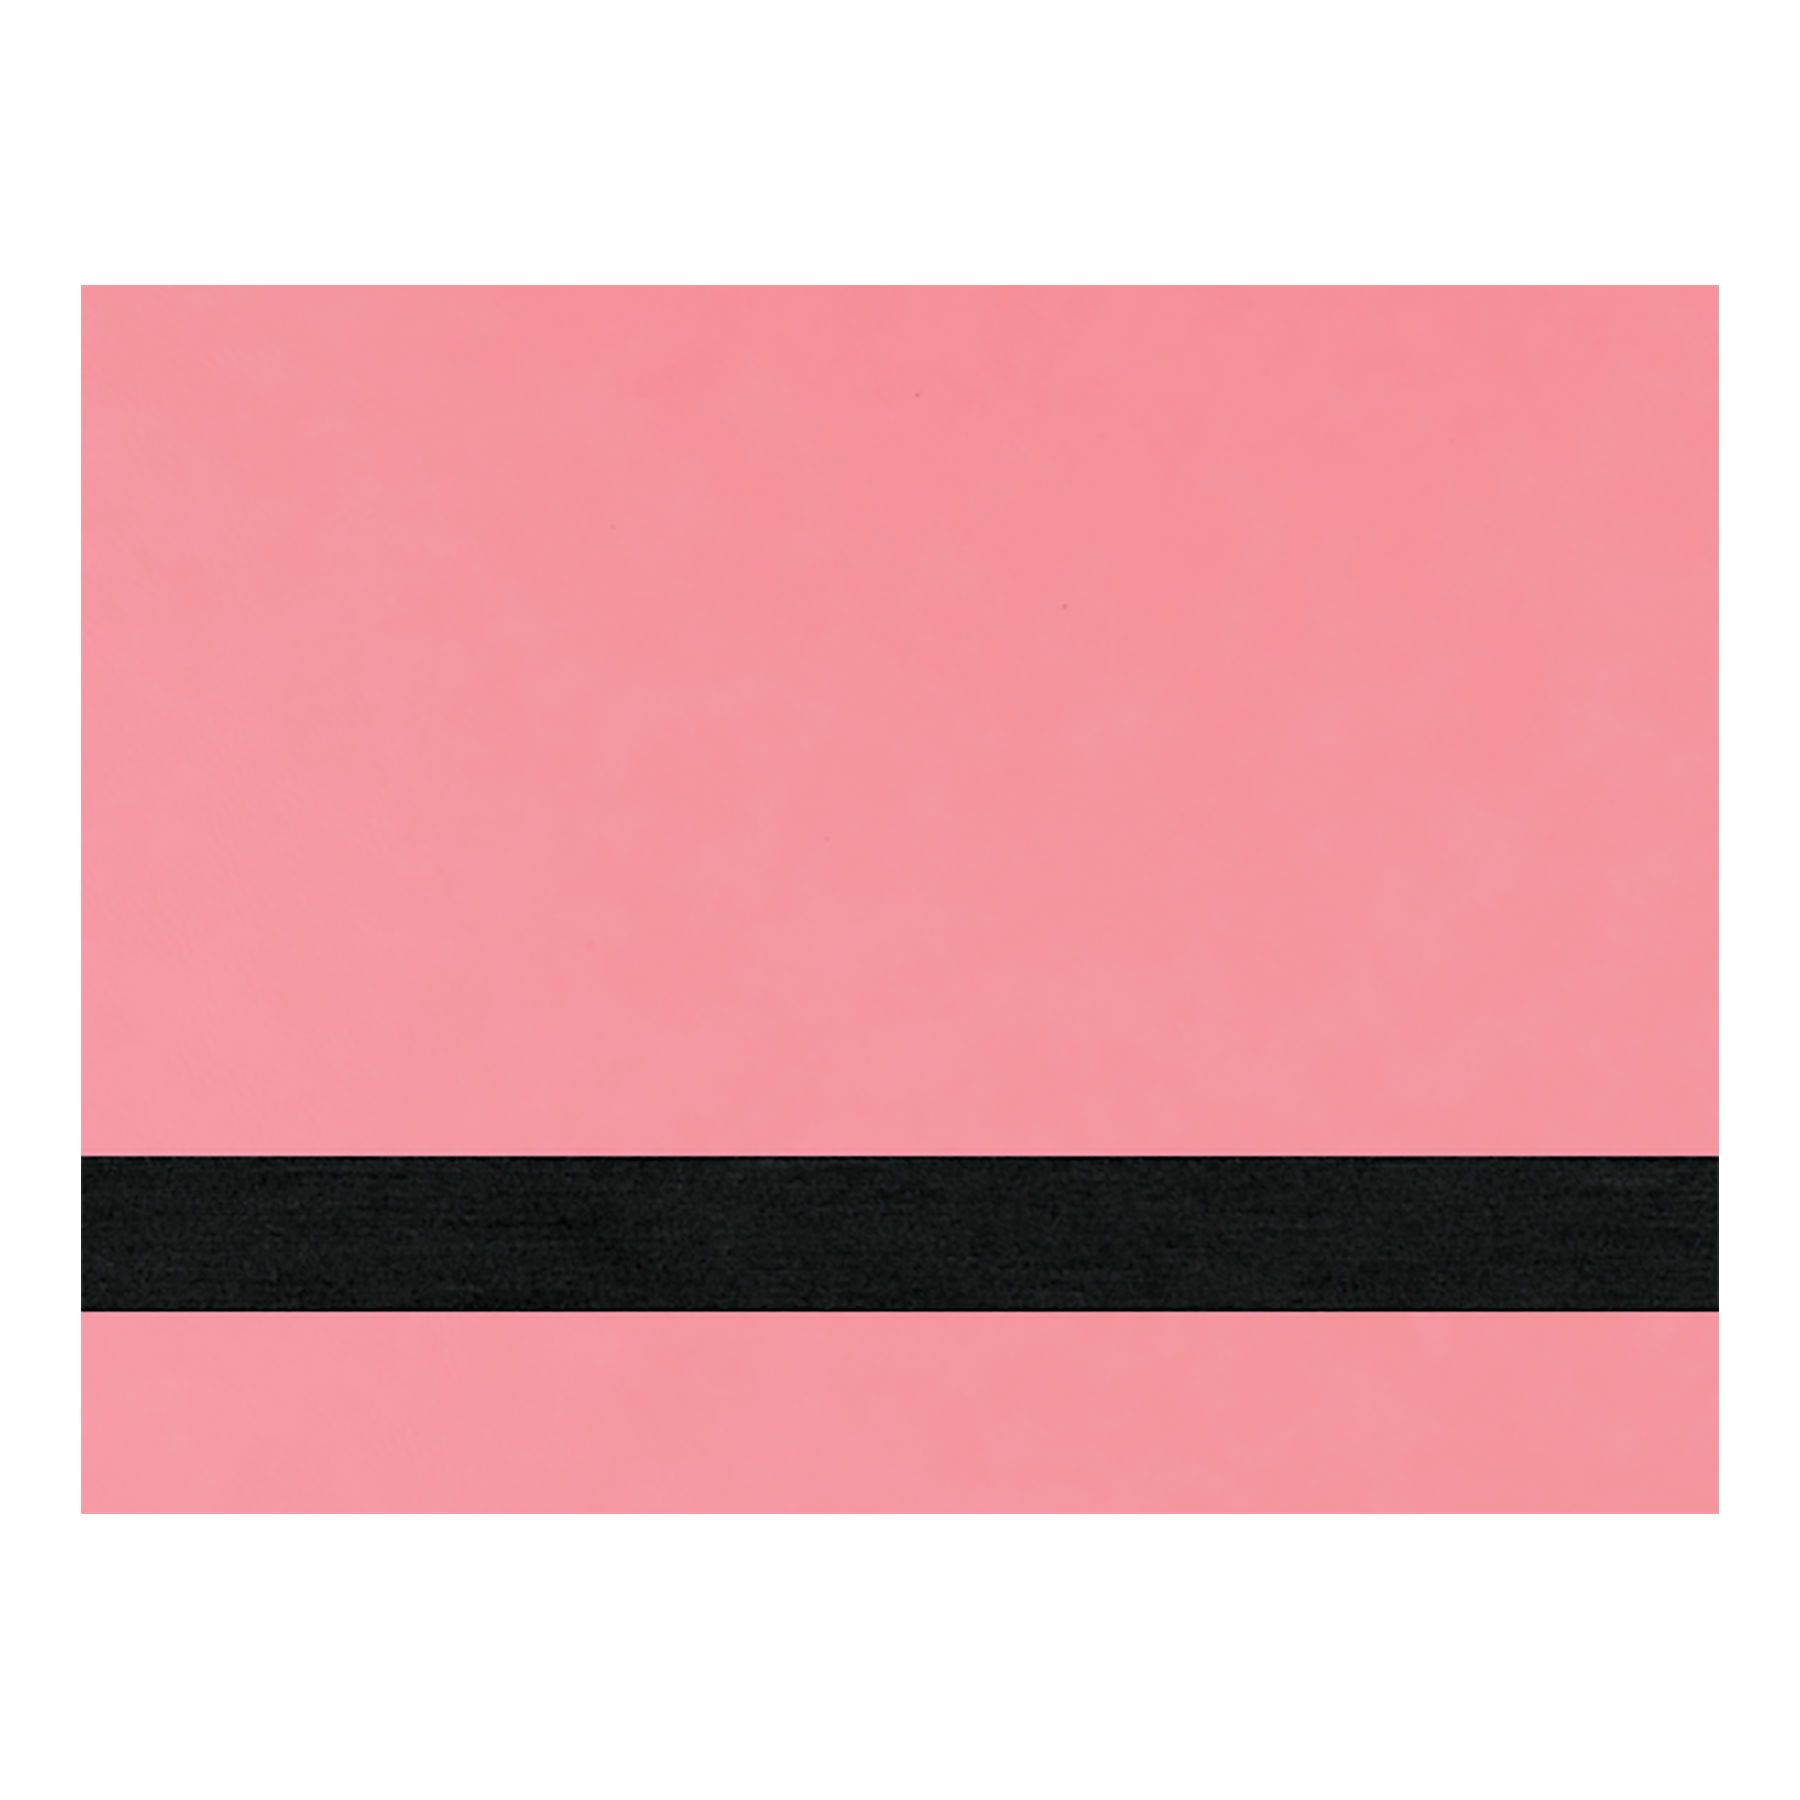 PRE-ORDER! Full Size Laserable Leatherette Sheet Stock, Epilog Fusion Edge Laser Engravers (Available Jan. 2022) Engraving Supplies Craftworks NW Fusion Edge 24 (24" x 24") Pink/Black 